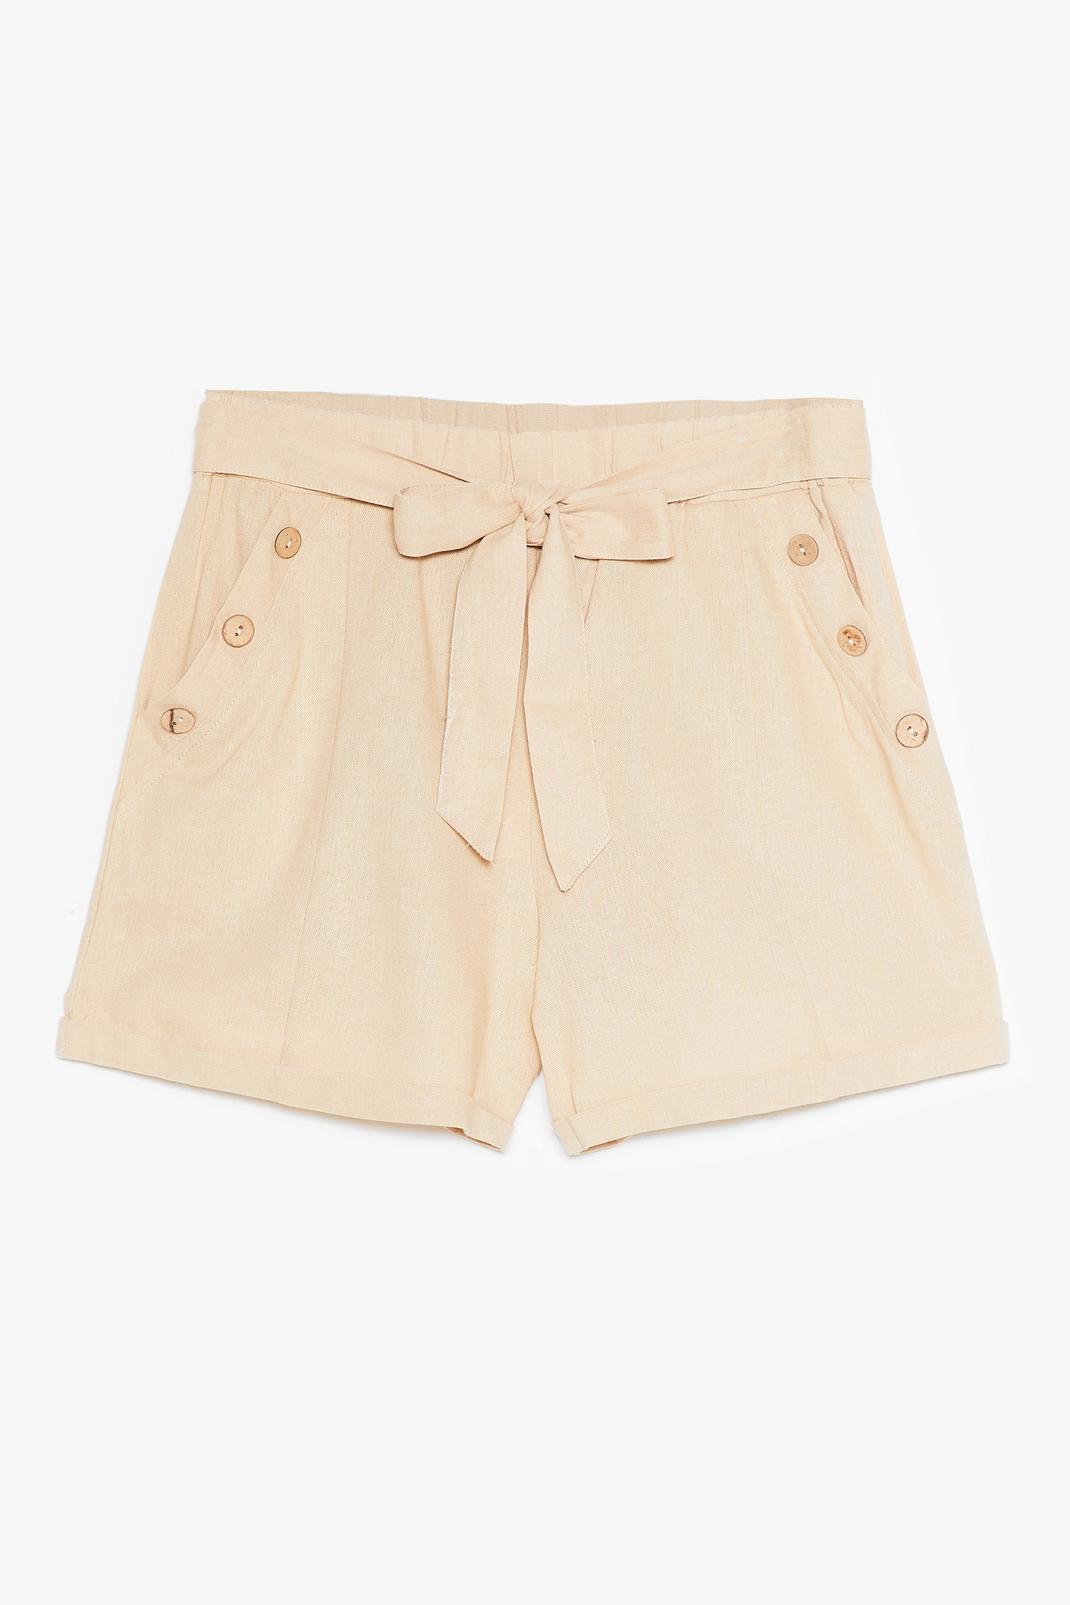 Beige Get Button With It High-Waisted Belted Shorts image number 1